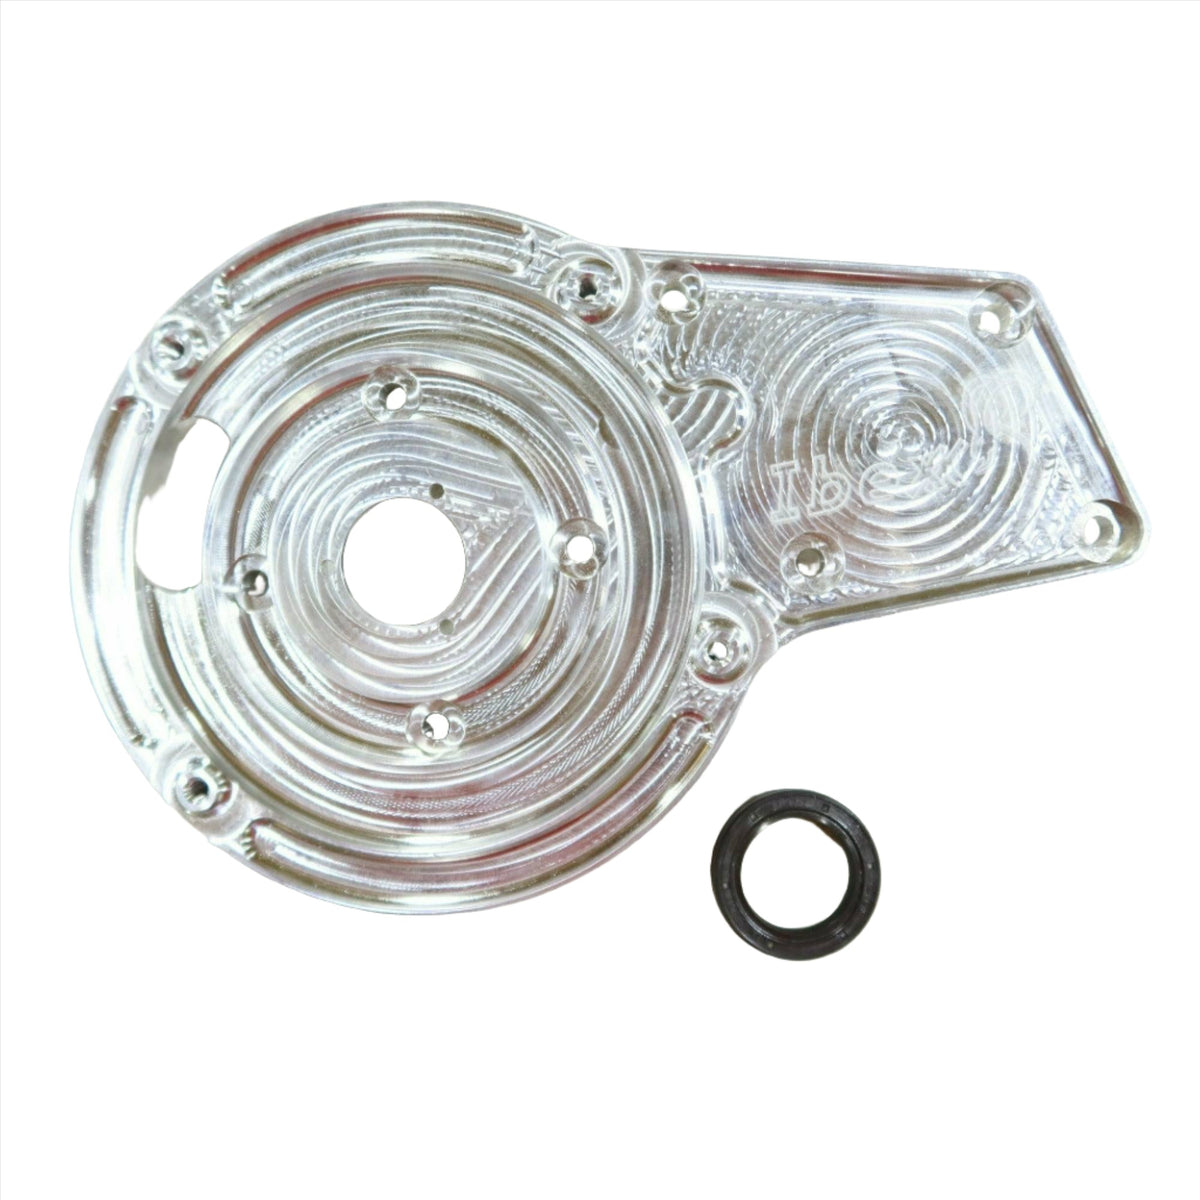 Ibexx Can Am Maverick X3 Transmission Bearing Cover